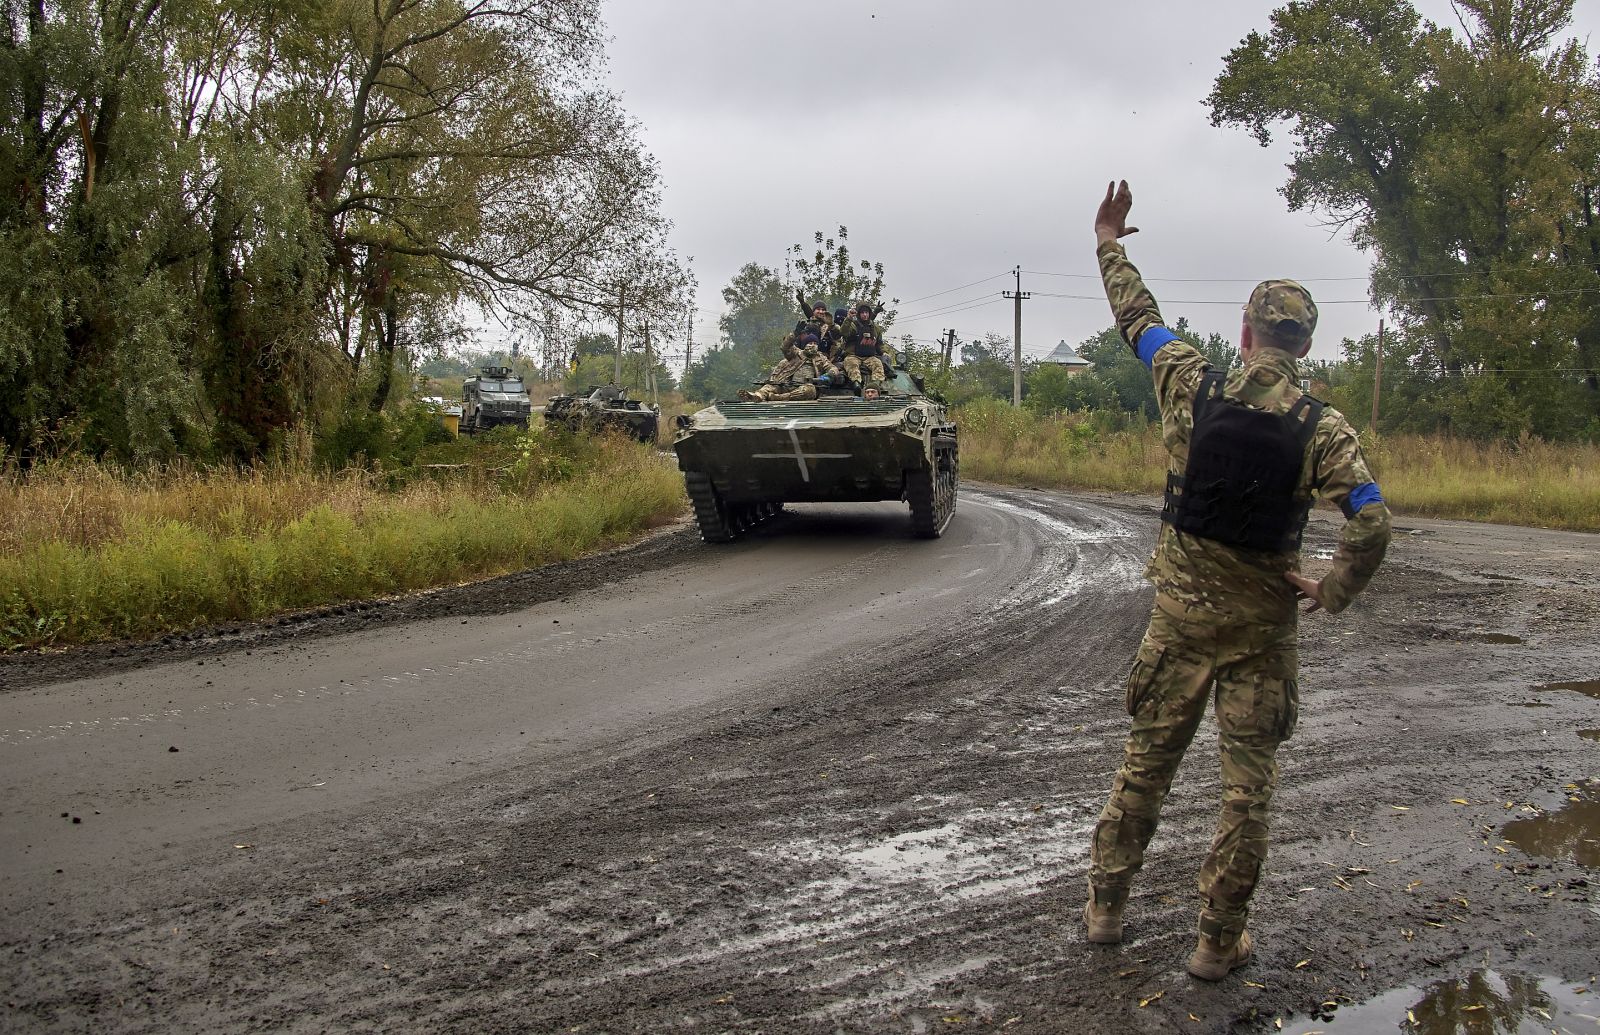 epa10188441 A Ukrainian serviceman waves at his comrades riding an armoured personnel carrier (APC) near the urban settlement of Kazachya Lopan, north of Kharkiv, northeastern Ukraine, 16 September 2022, amid Russia's invasion. The Ukrainian army pushed Russian troops from occupied territory in the northeast of the country in a counterattack. Kharkiv and surrounding areas have been the target of heavy shelling since February 2022, when Russian troops entered Ukraine starting a conflict that has provoked destruction and a humanitarian crisis.  EPA/SERGEY KOZLOV